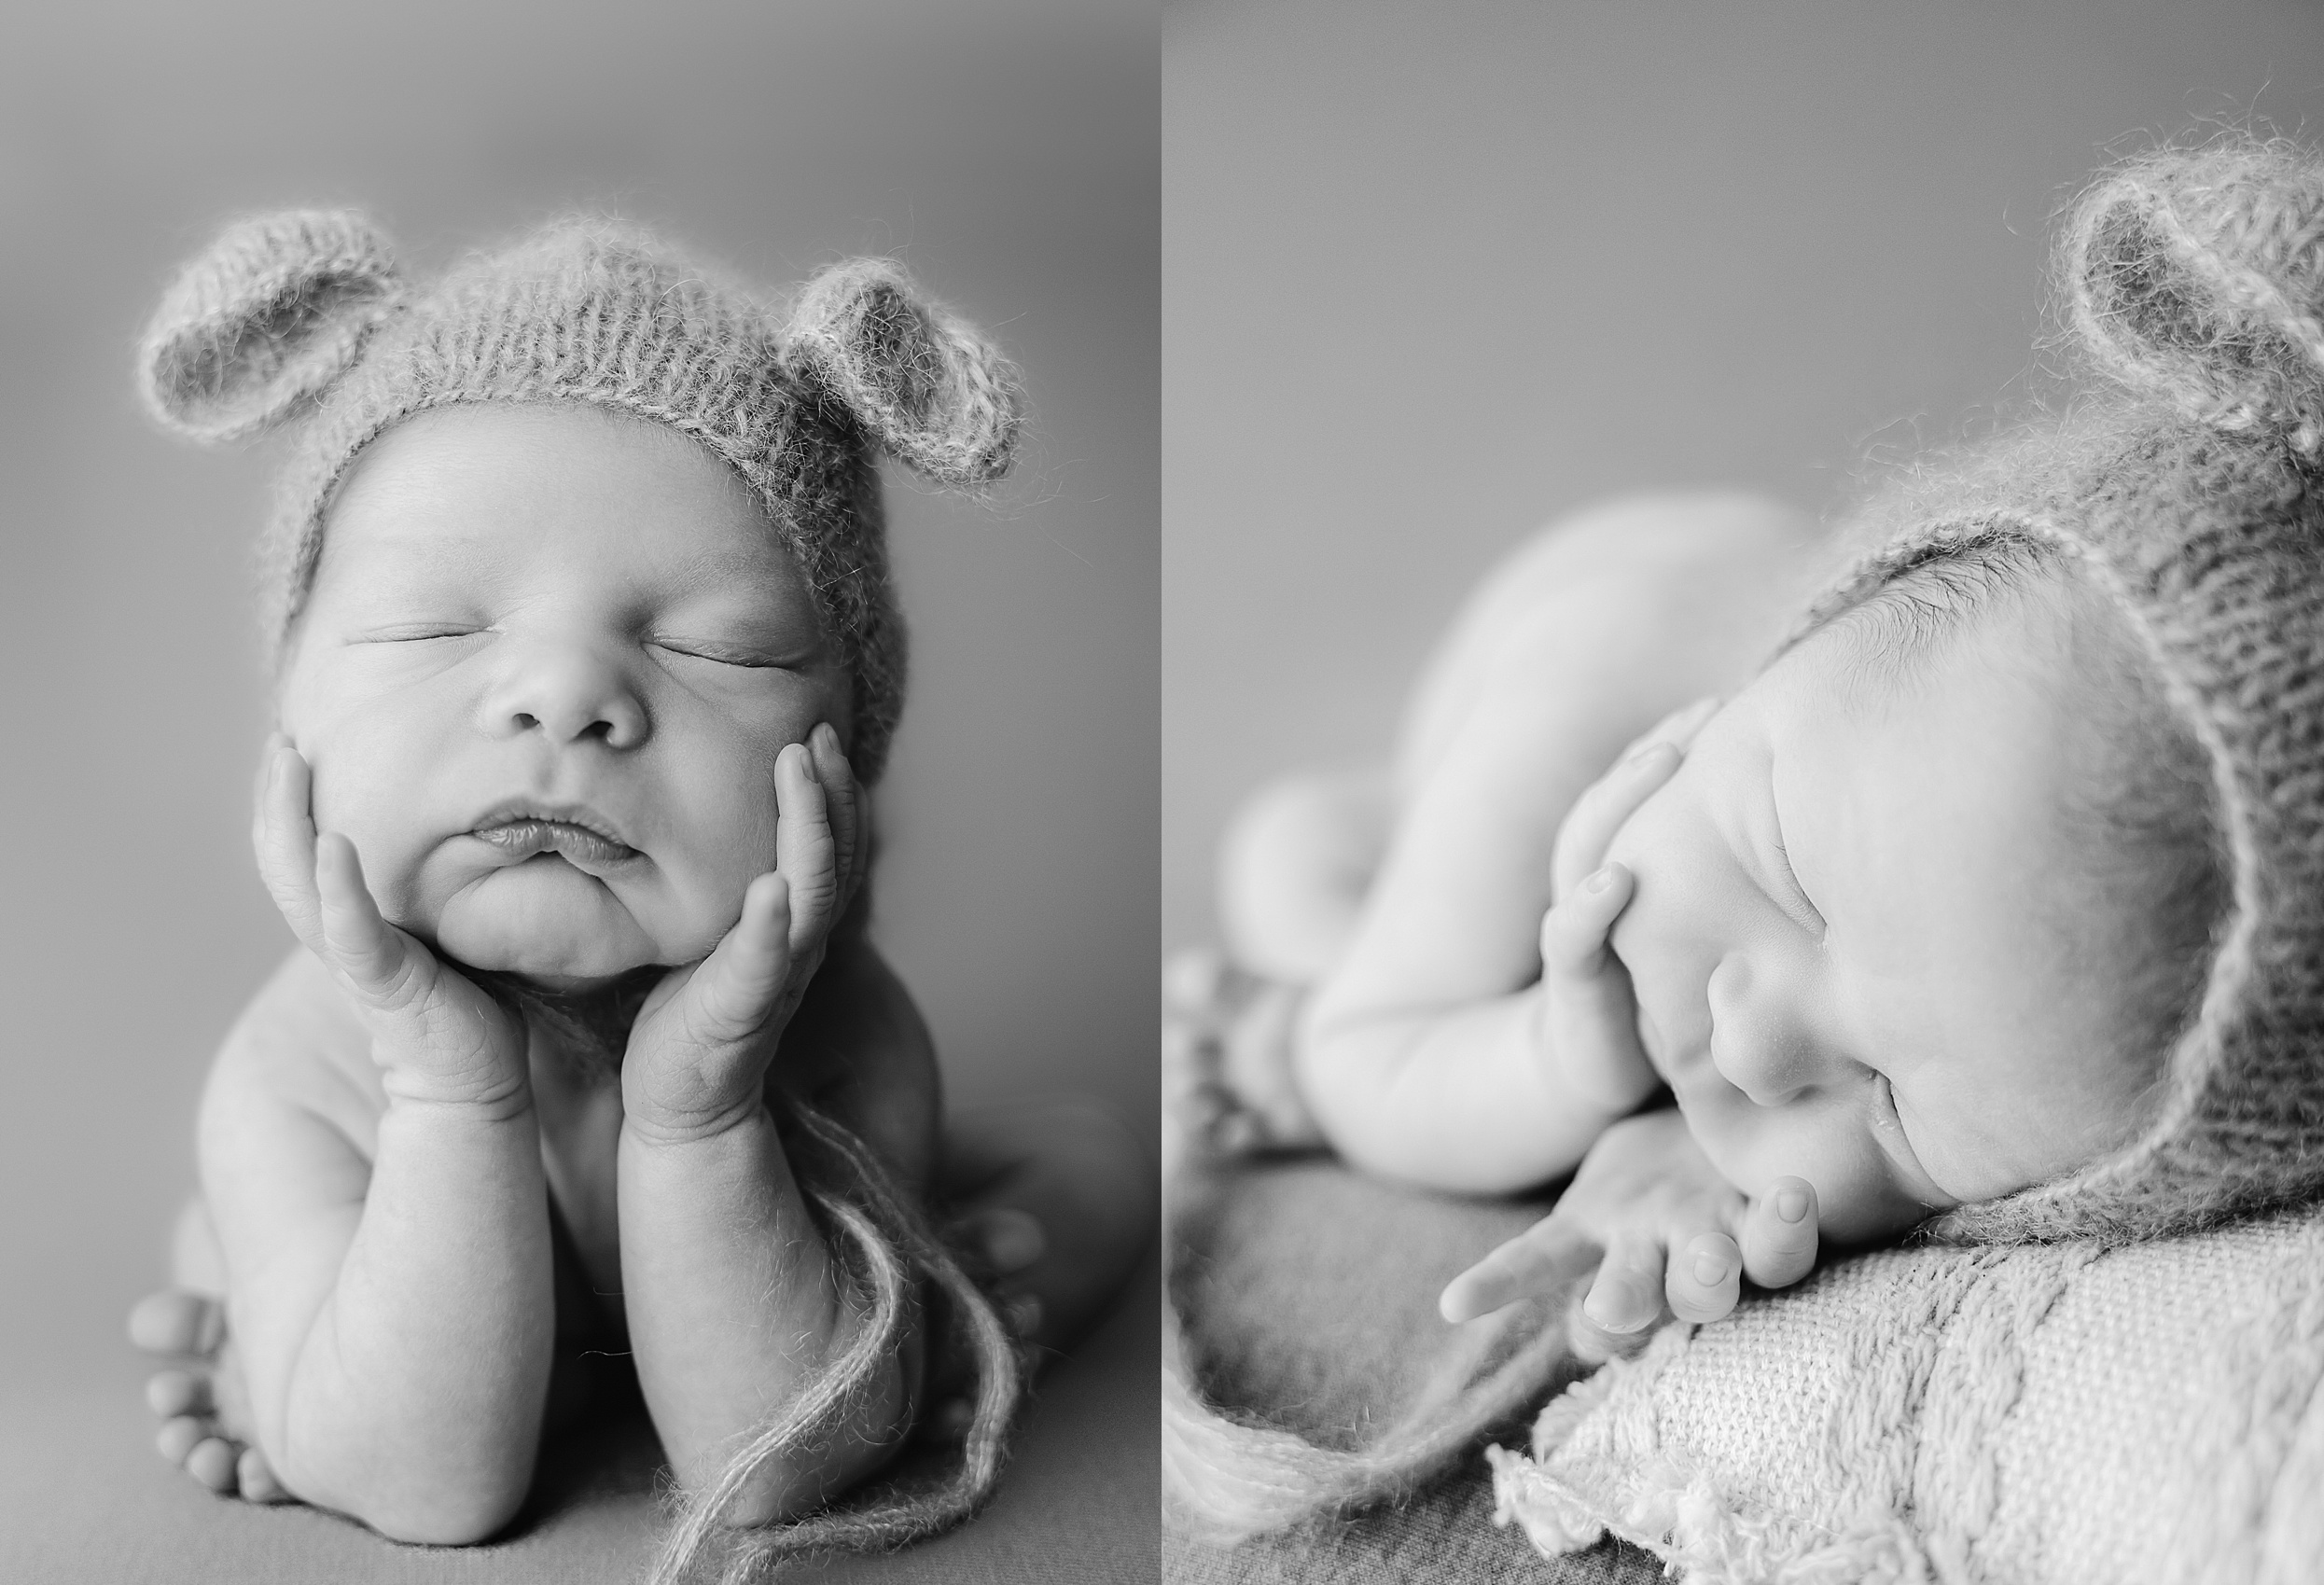 Newborn baby posed in froggy and side lying positions in black and white